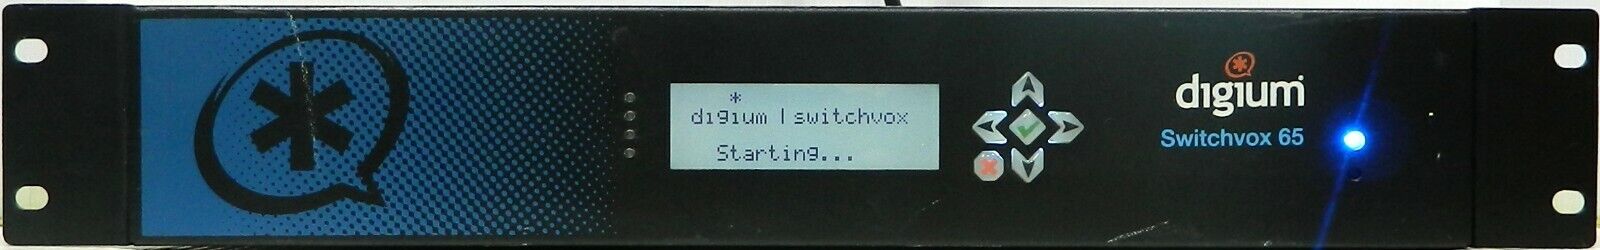 Digium Switchvox 65 AA65 VolP System, 2AS65001LF-C w/ rack ears